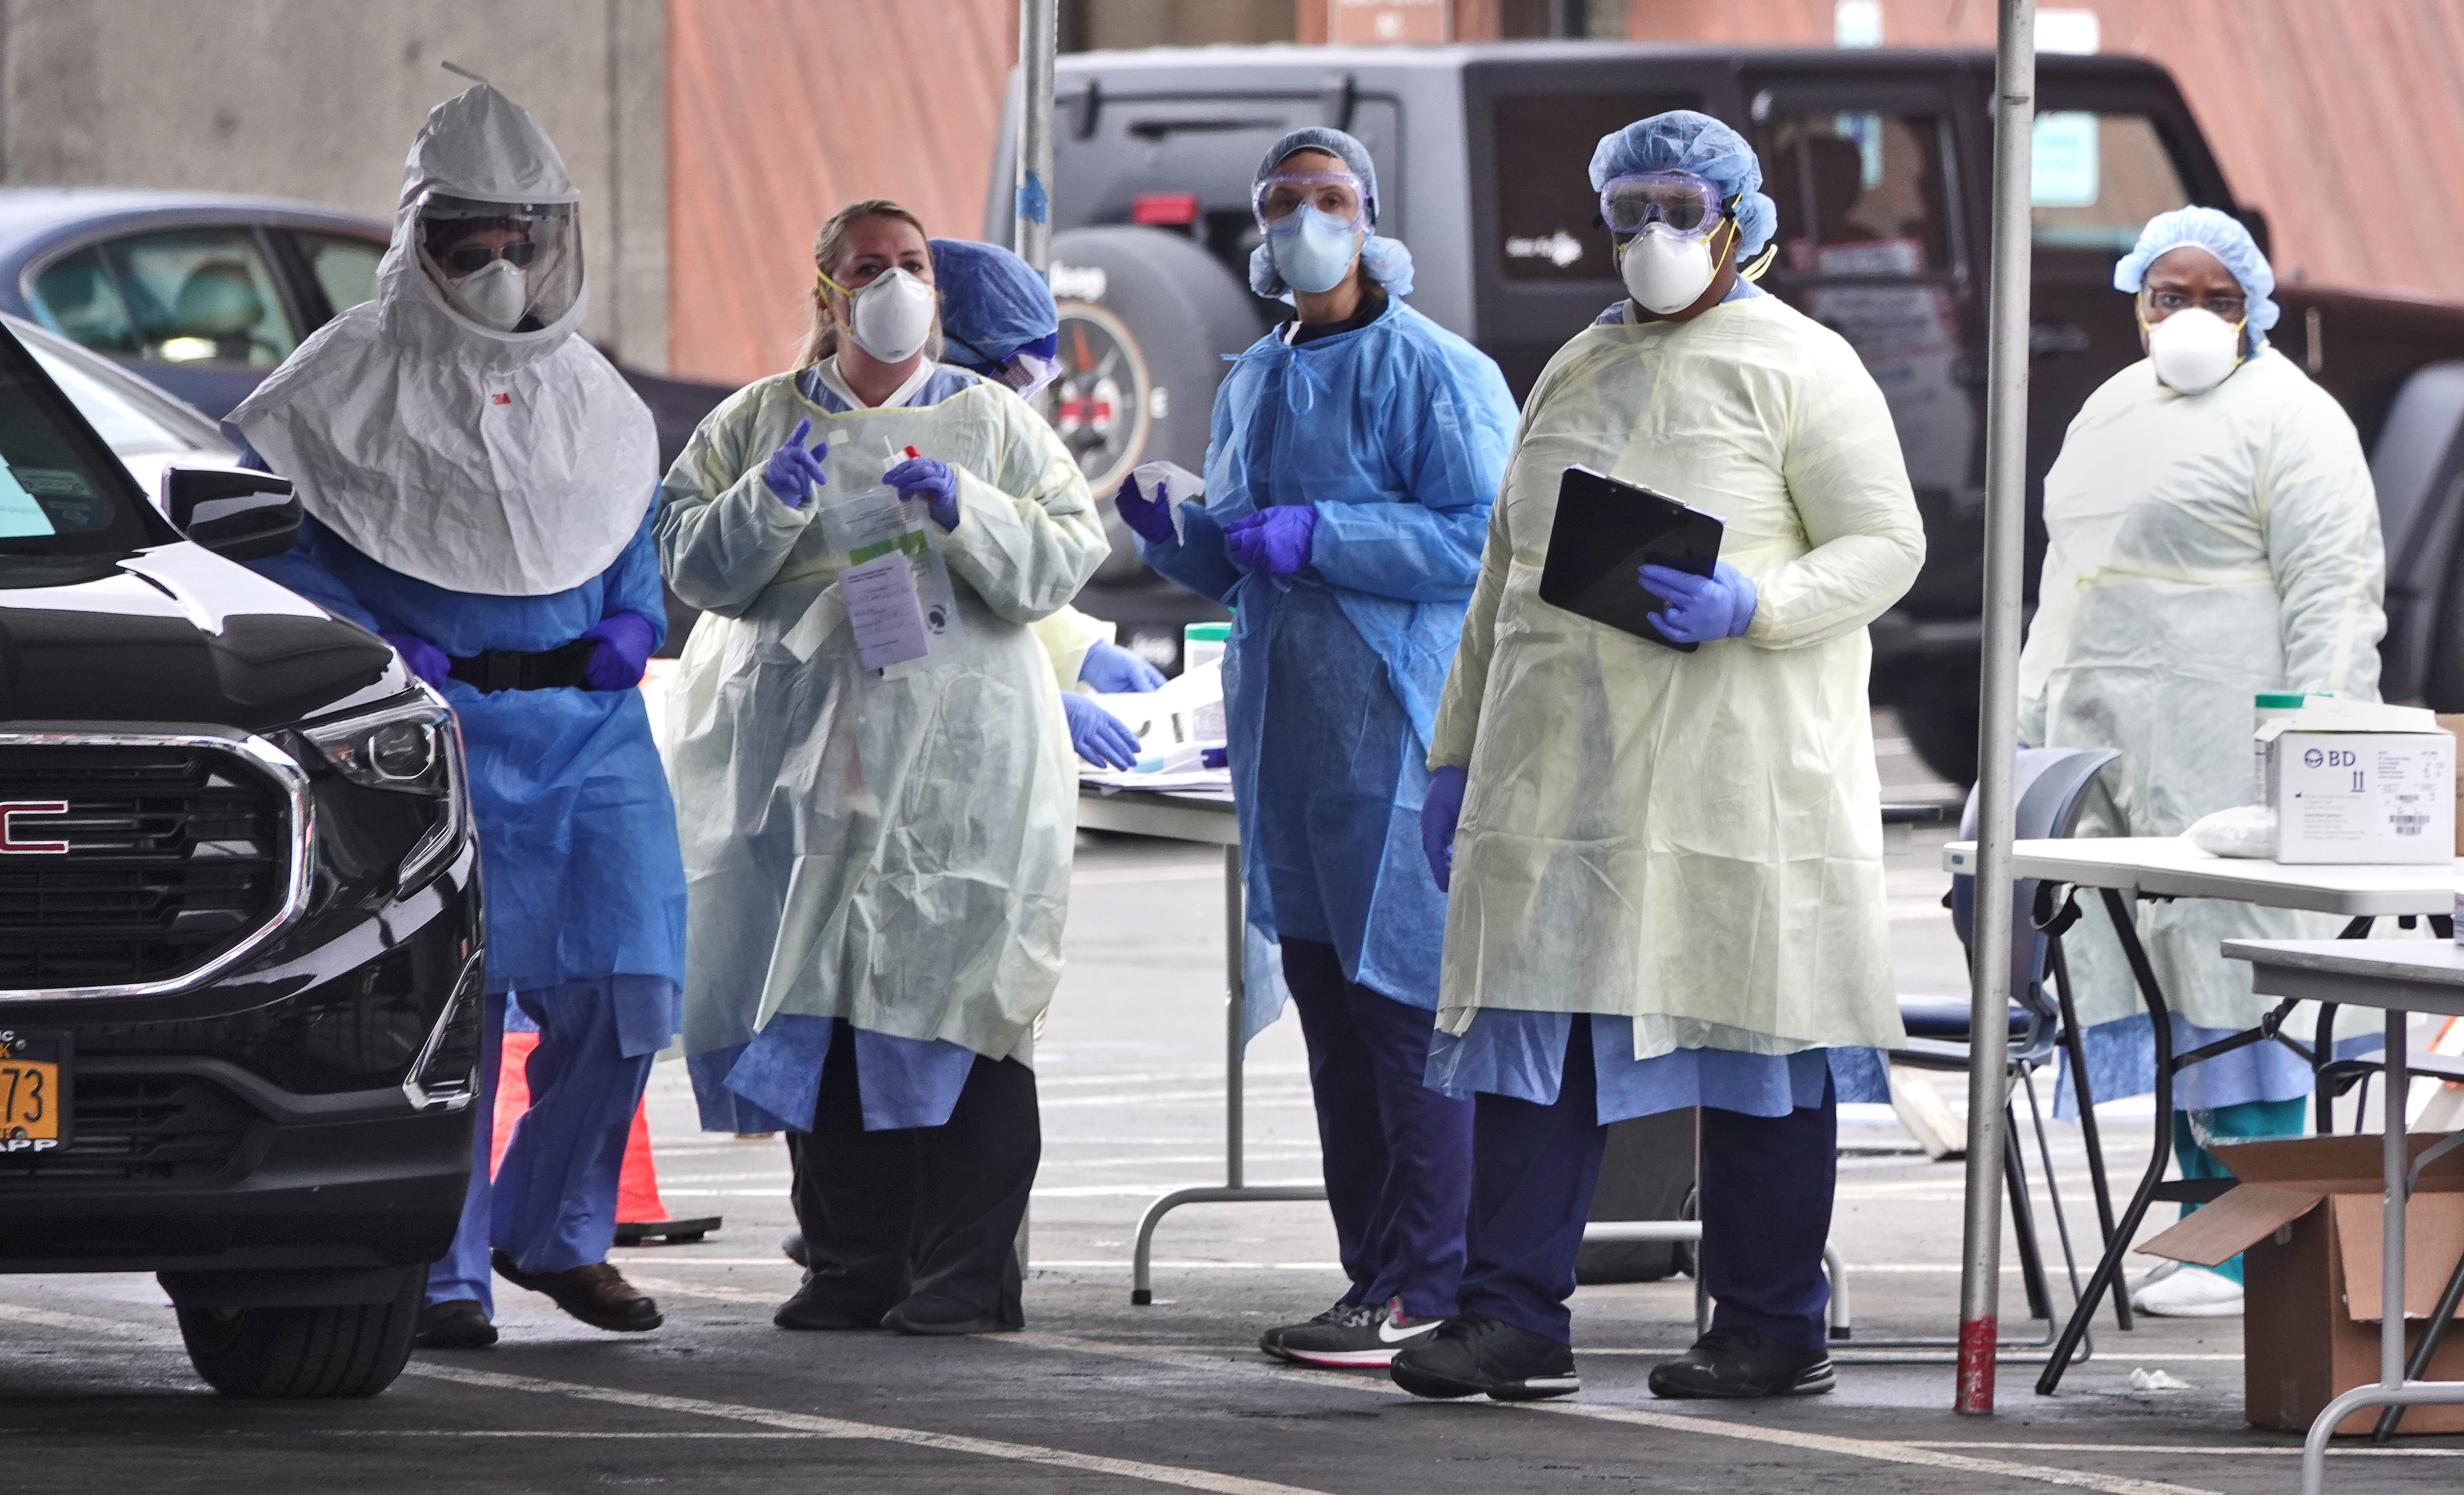 Workers in protective gear are seen at a drive-thru coronavirus testing site